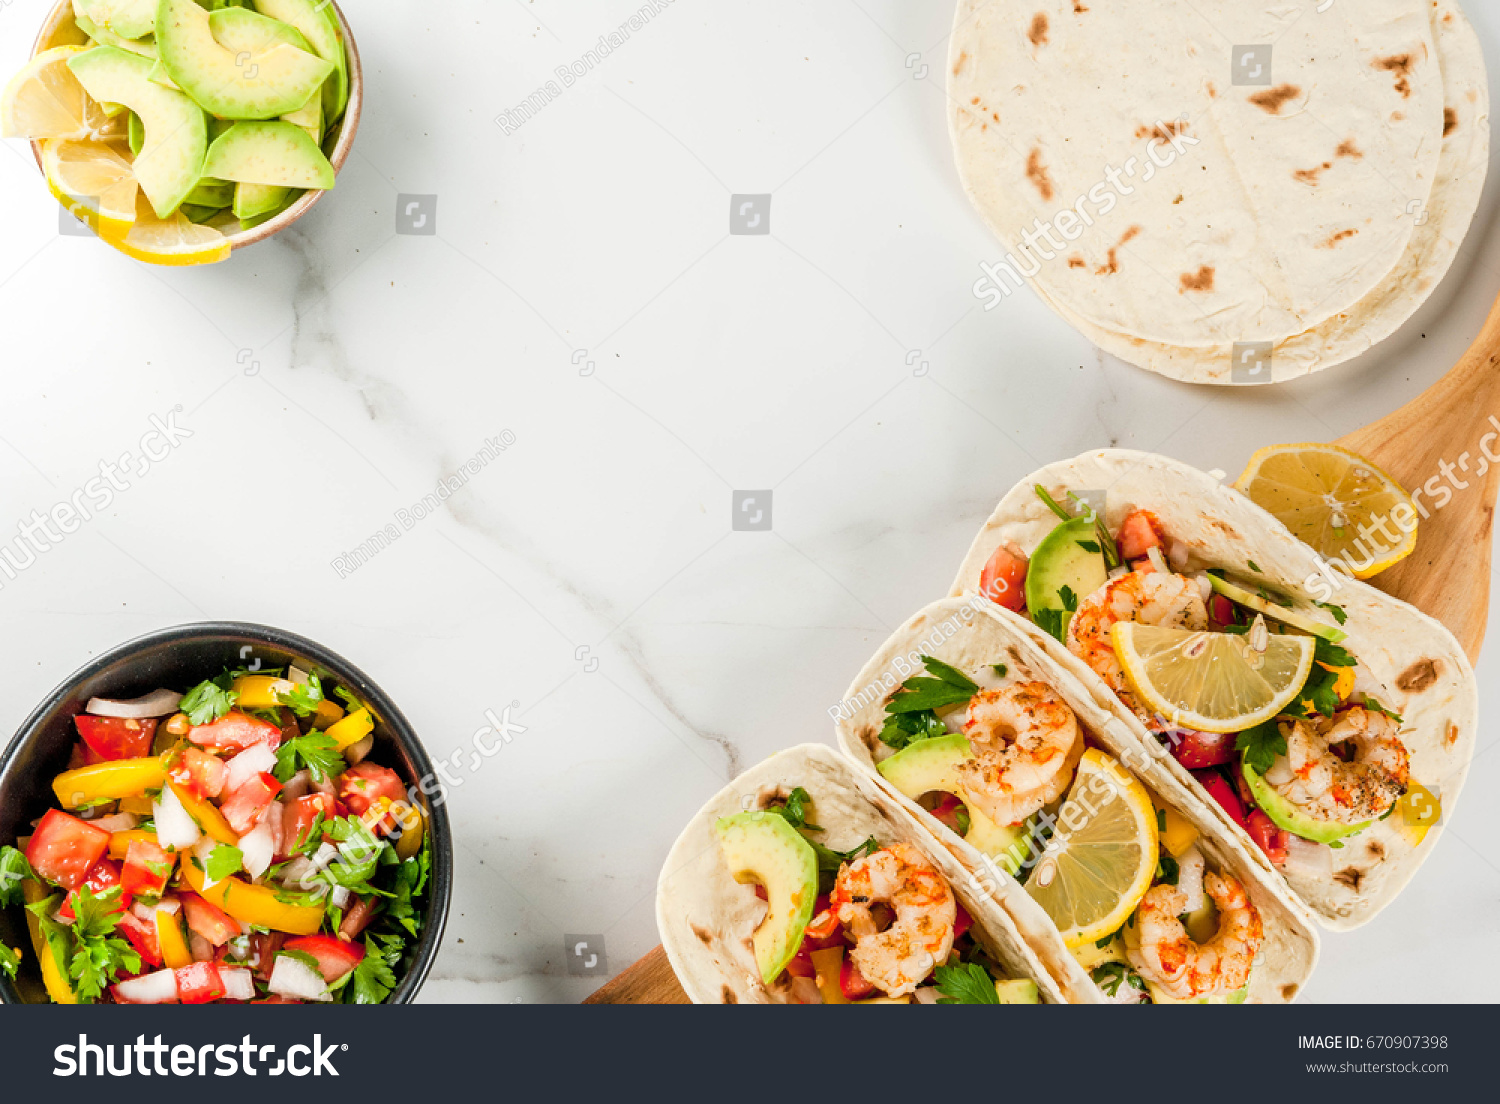 Seafood. Mexican food. Tortilla tacos with traditional homemade salsa salad, parsley, fresh lemon, avocado and grilled shrimp pawns. On a white marble background. Top view copy space #670907398